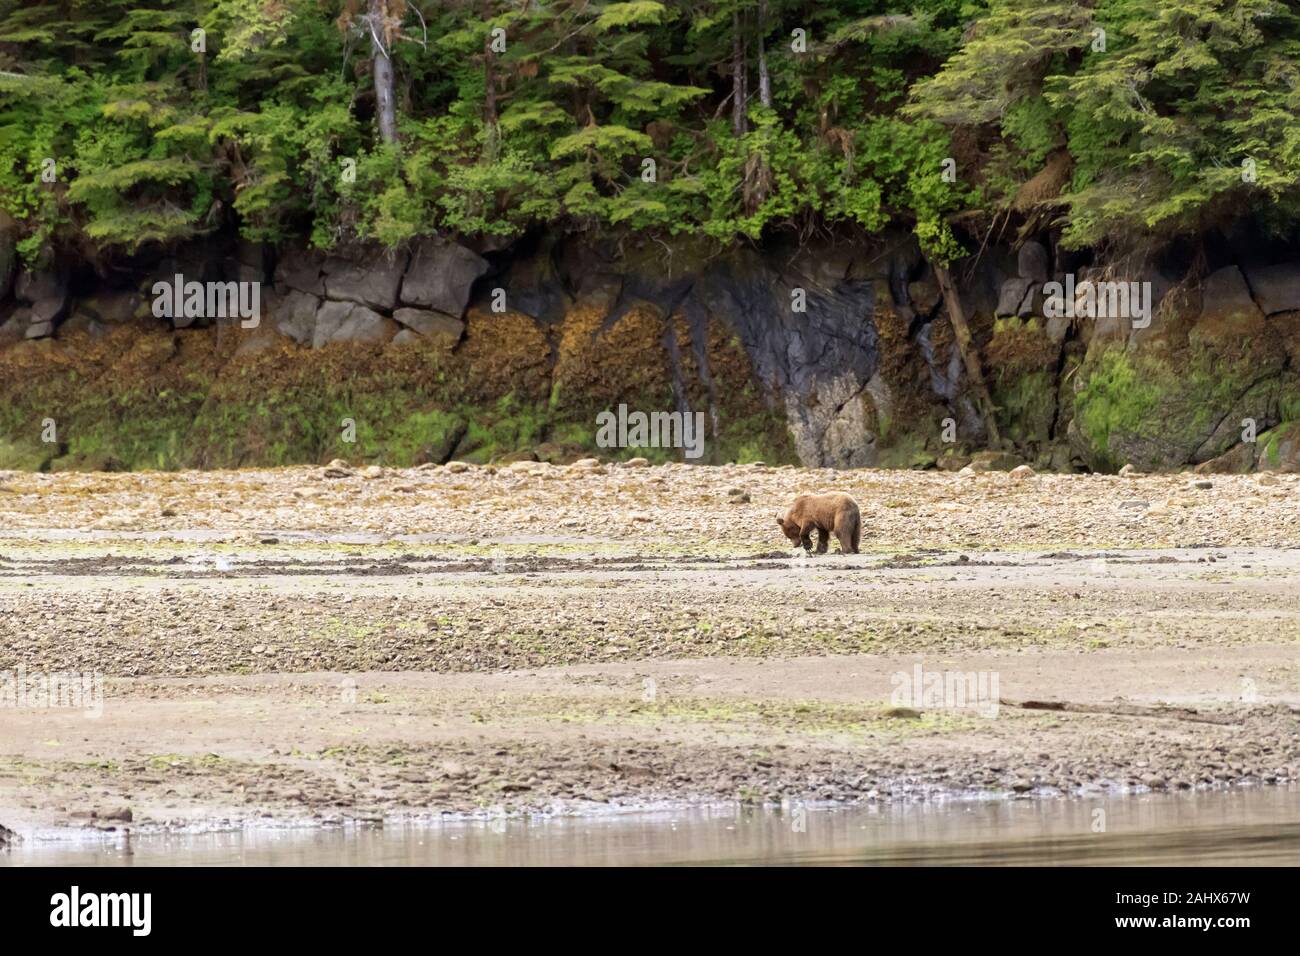 Young grizzly bear digging for clams at low tide, Khutzeymateen Grizzly Bear Sanctuary, British Columbia Stock Photo